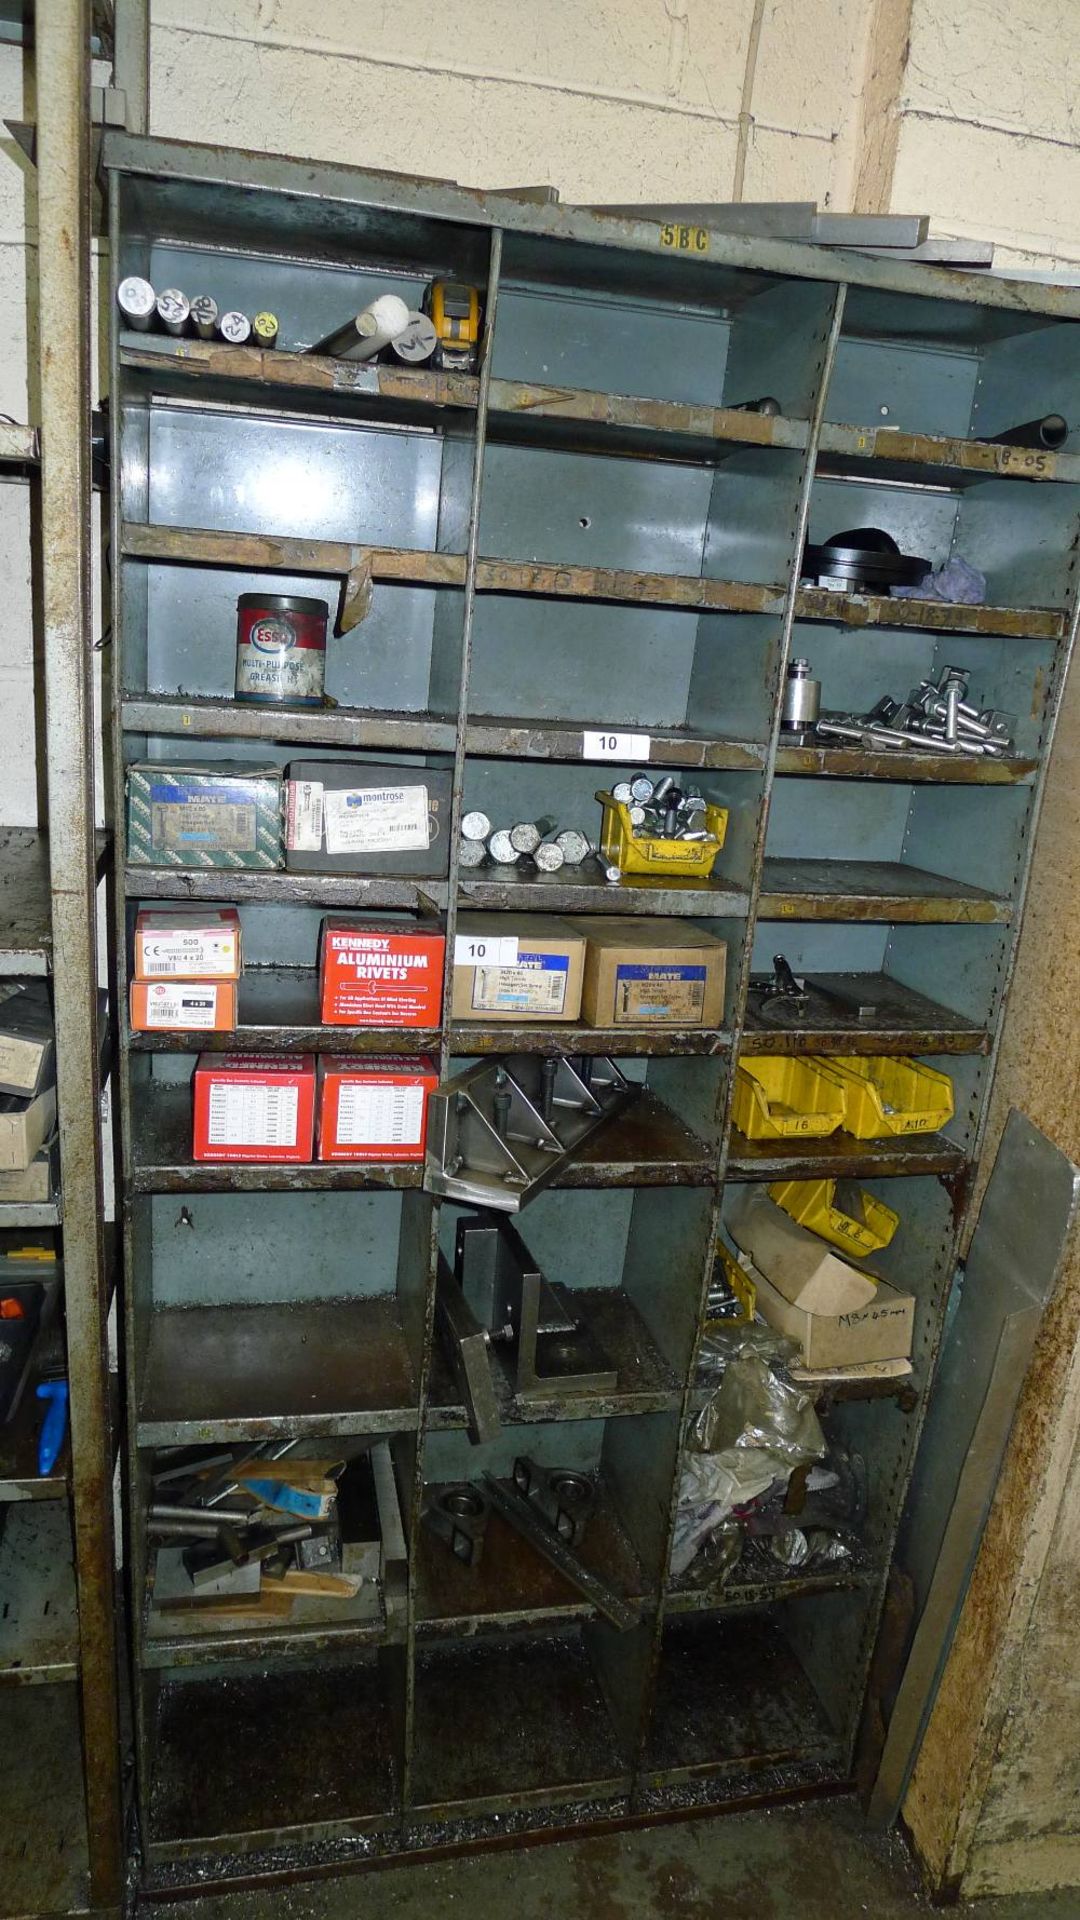 1 storage rack containing a quantity of various items including machine bolts, screws, rivets, angle